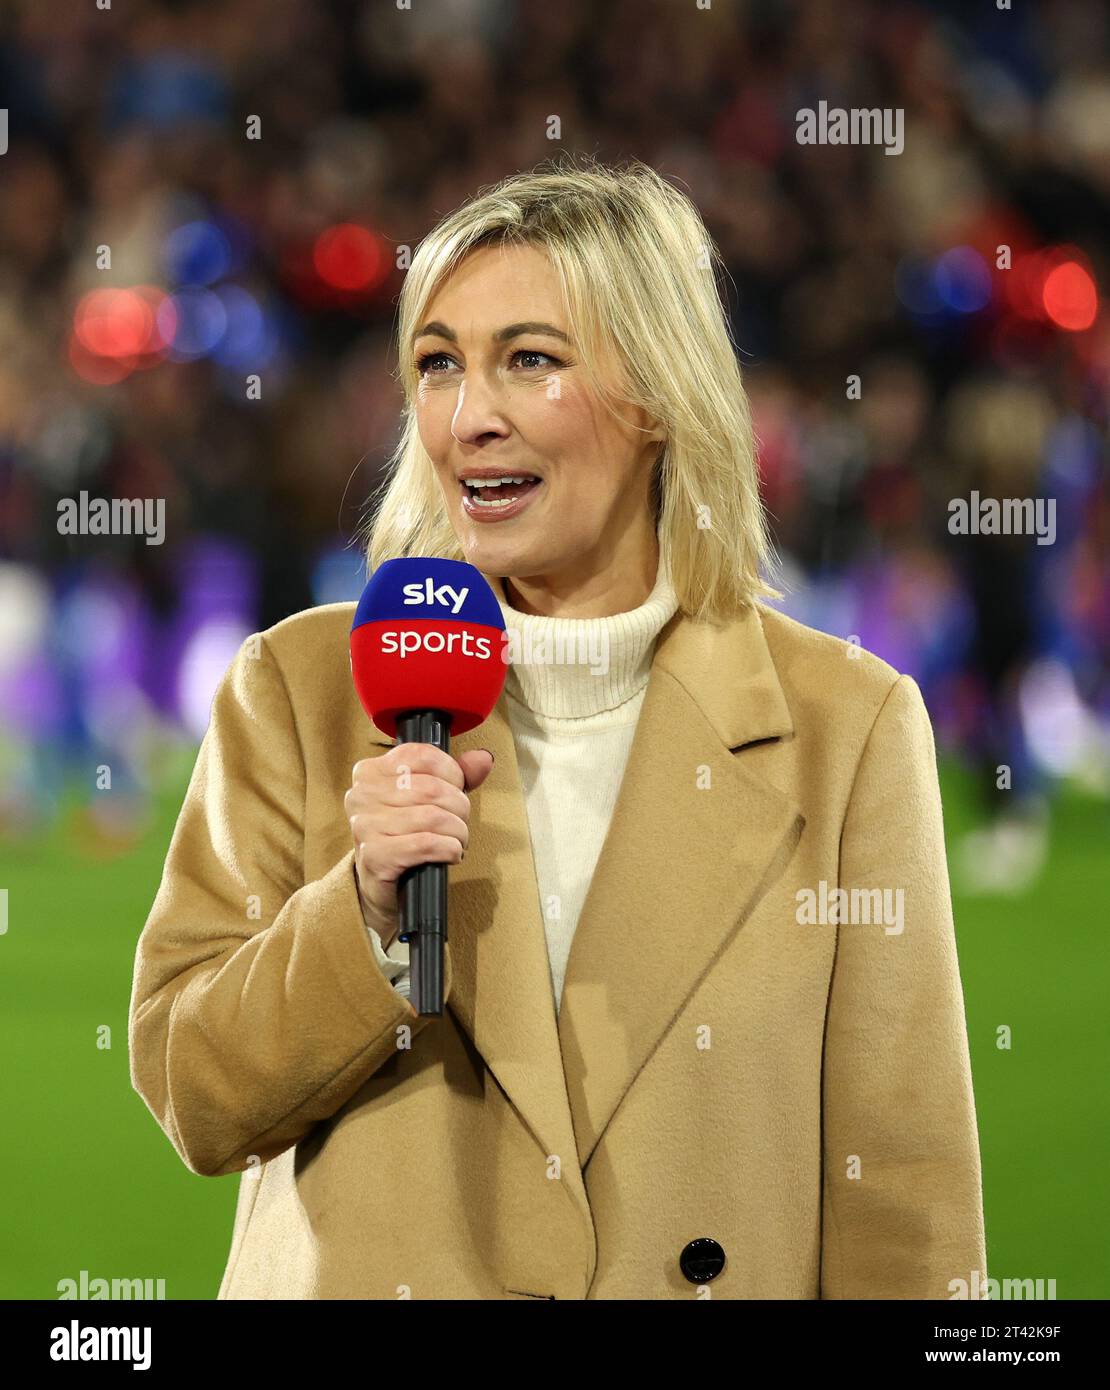 London, UK. 27th Oct, 2023. Sky presenter Kelly Cates during the Premier League match at Selhurst Park, London. Picture credit should read: David Klein/Sportimage Credit: Sportimage Ltd/Alamy Live News Stock Photo